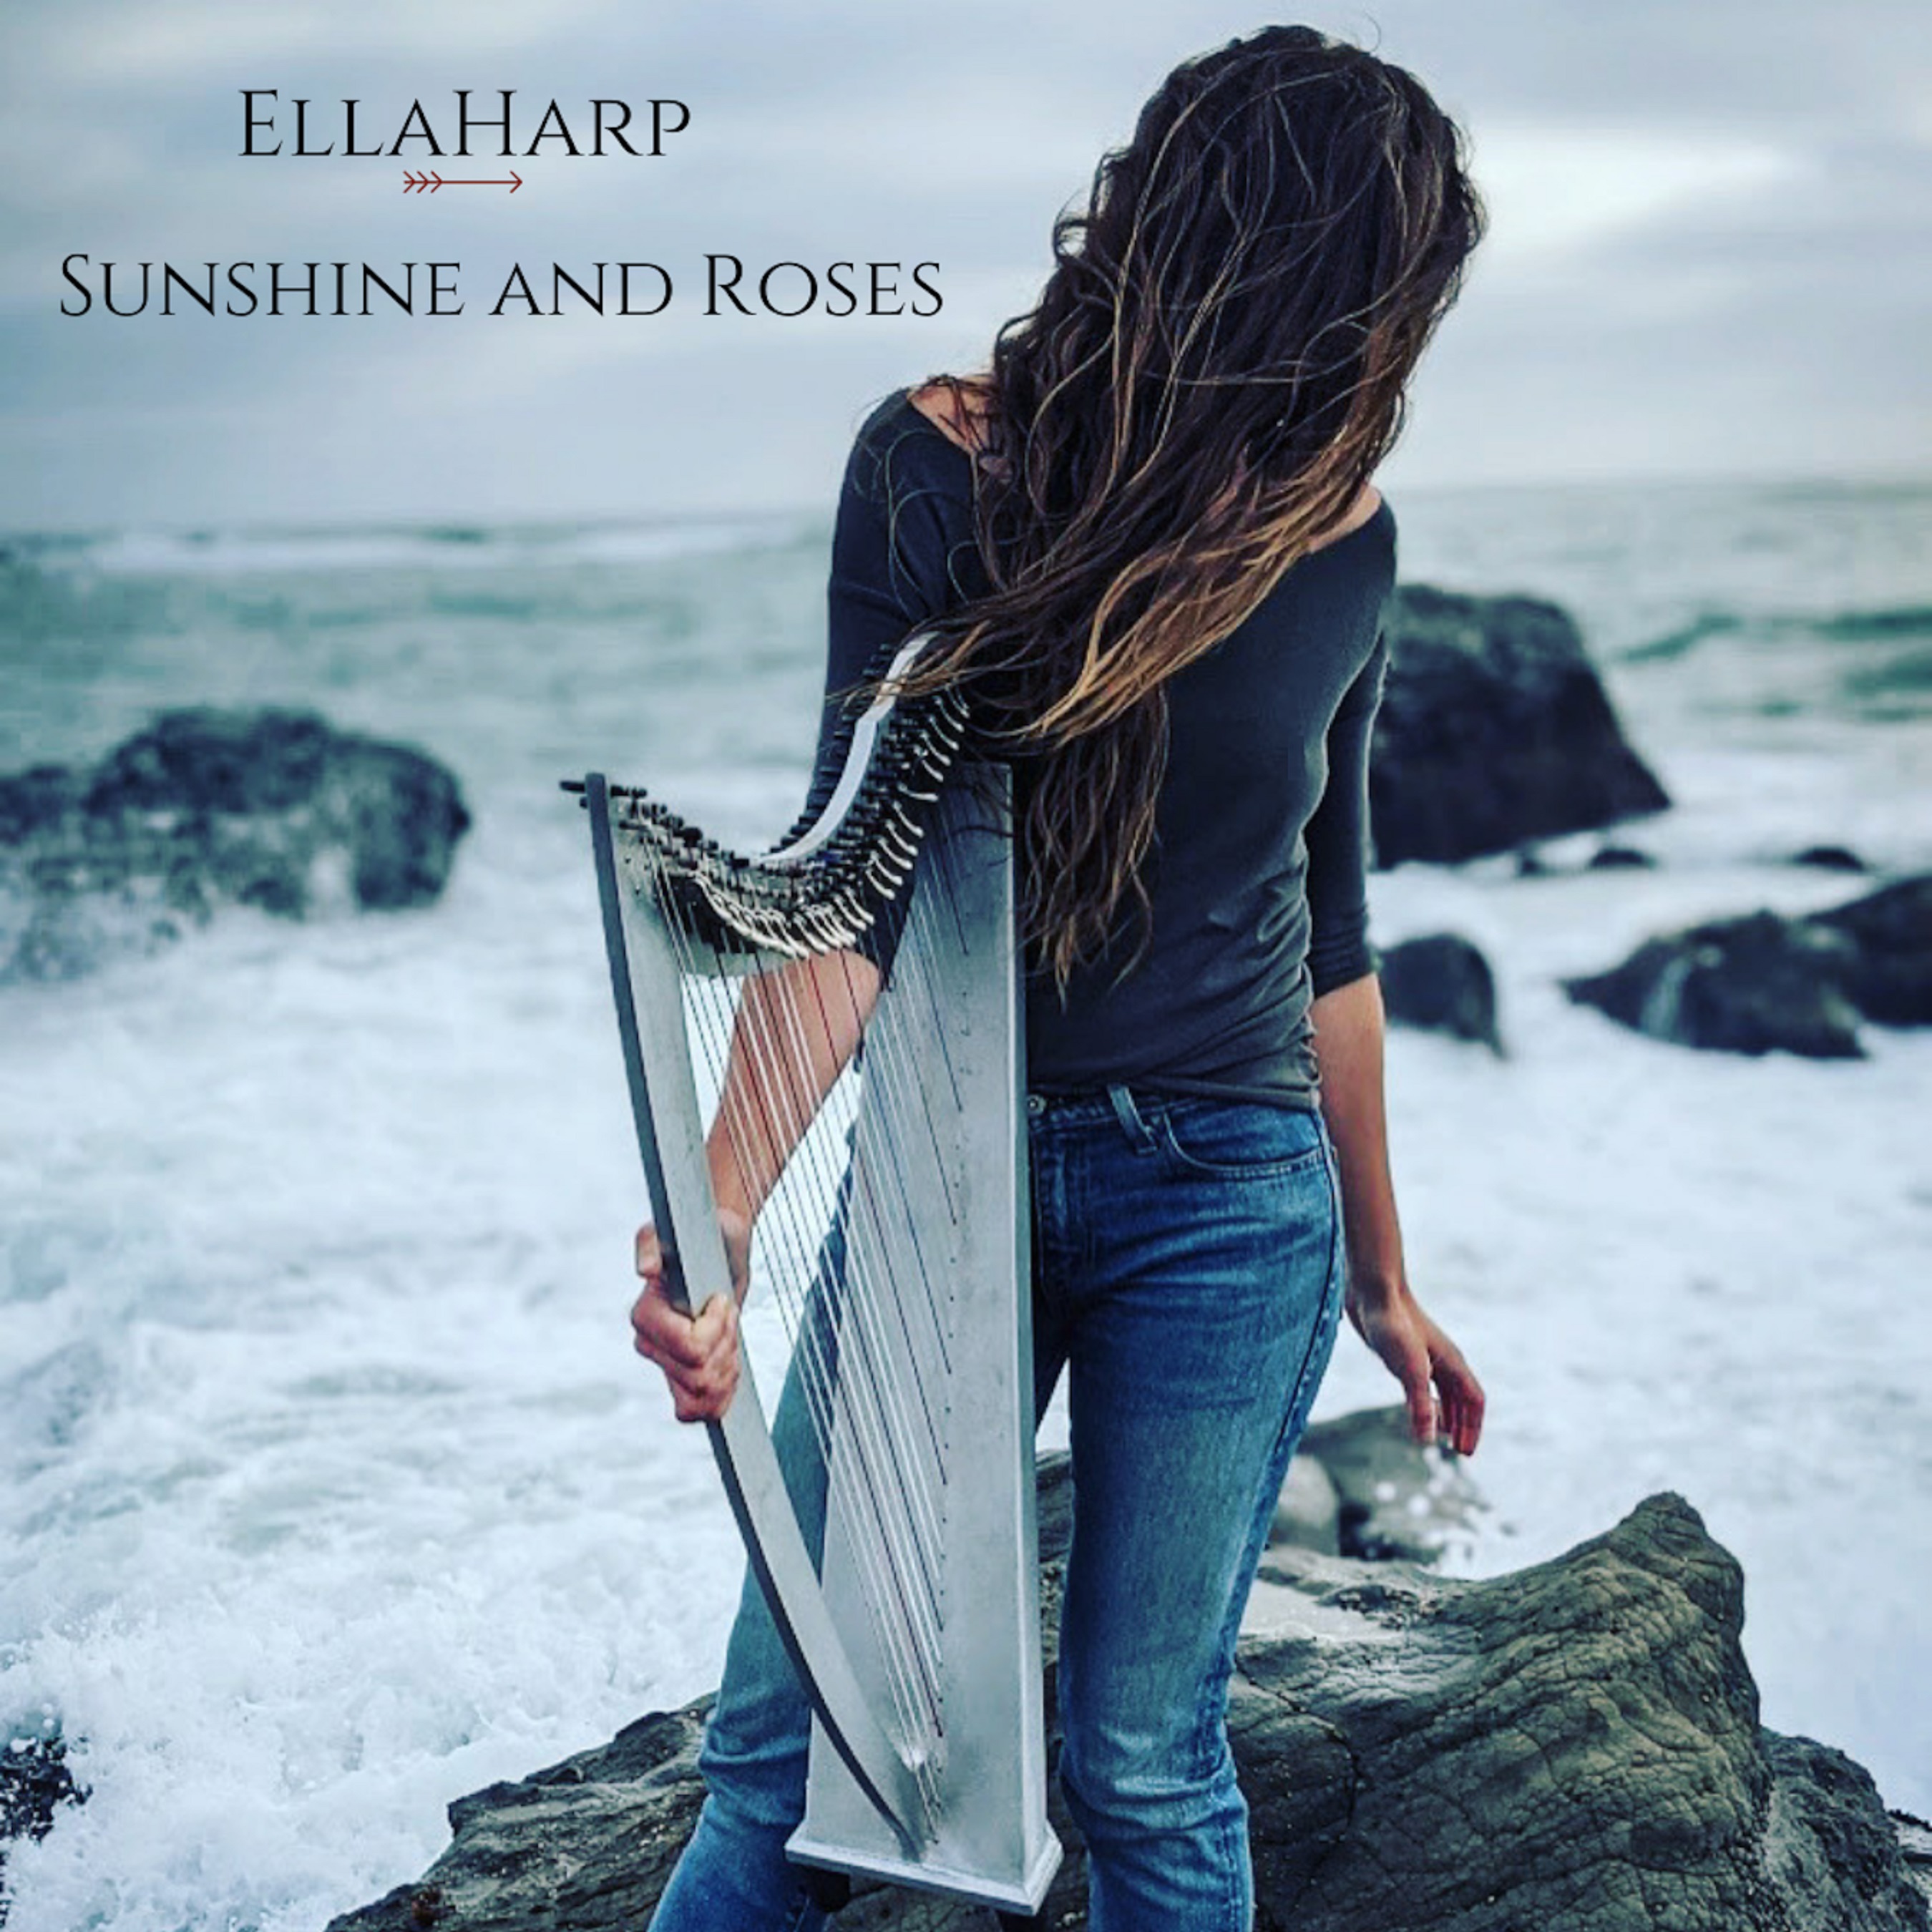 EllaHarp Releases "Sunshine and Roses" From Upcoming ‘Screaming Into The Void’ LP